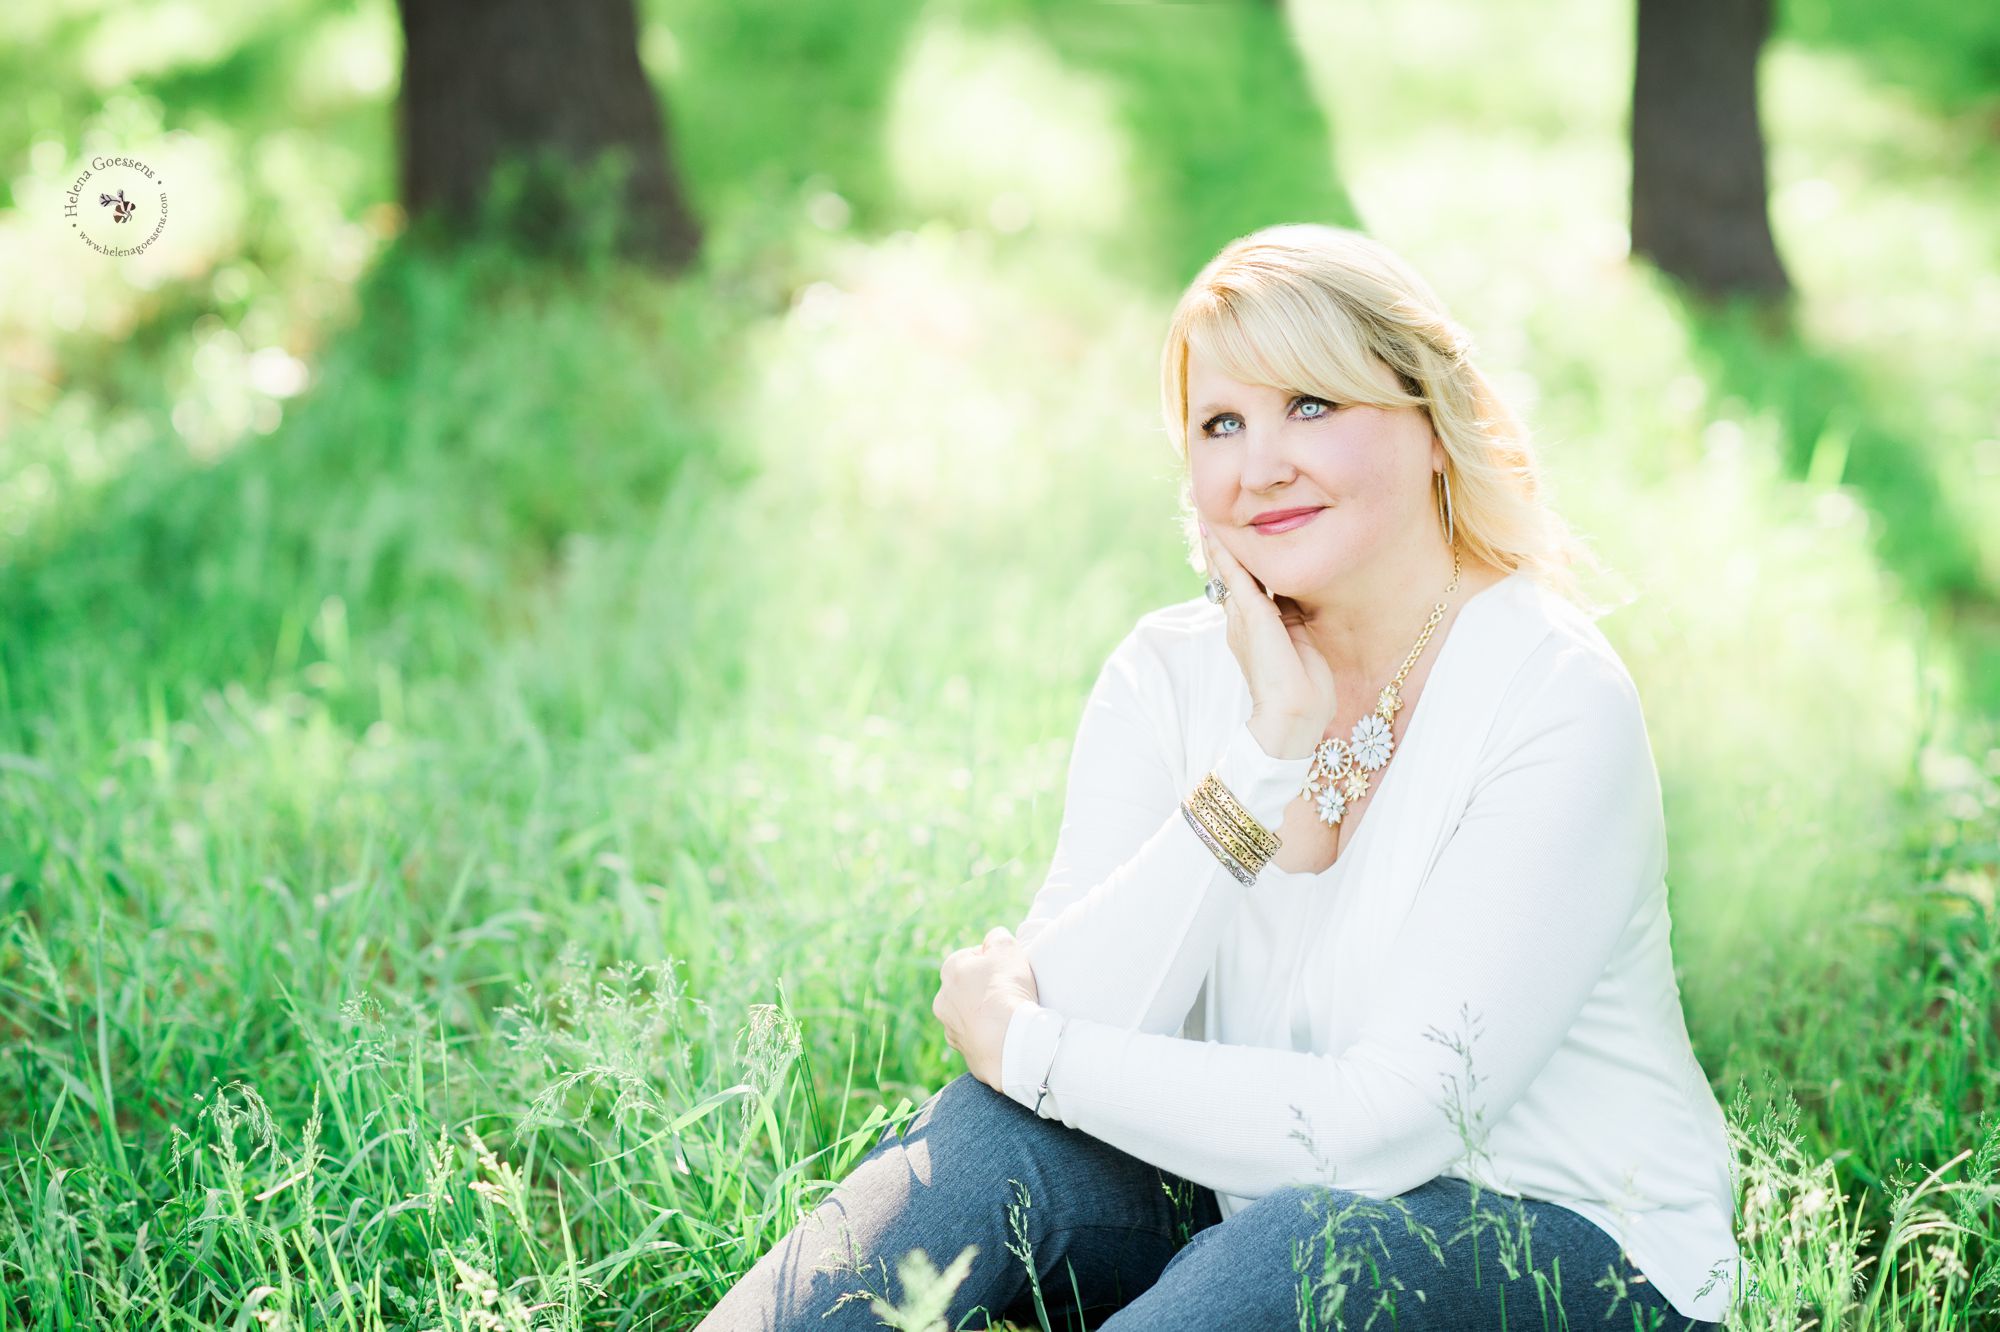 blond woman with blue eyes wearing a white top sitting on the grass